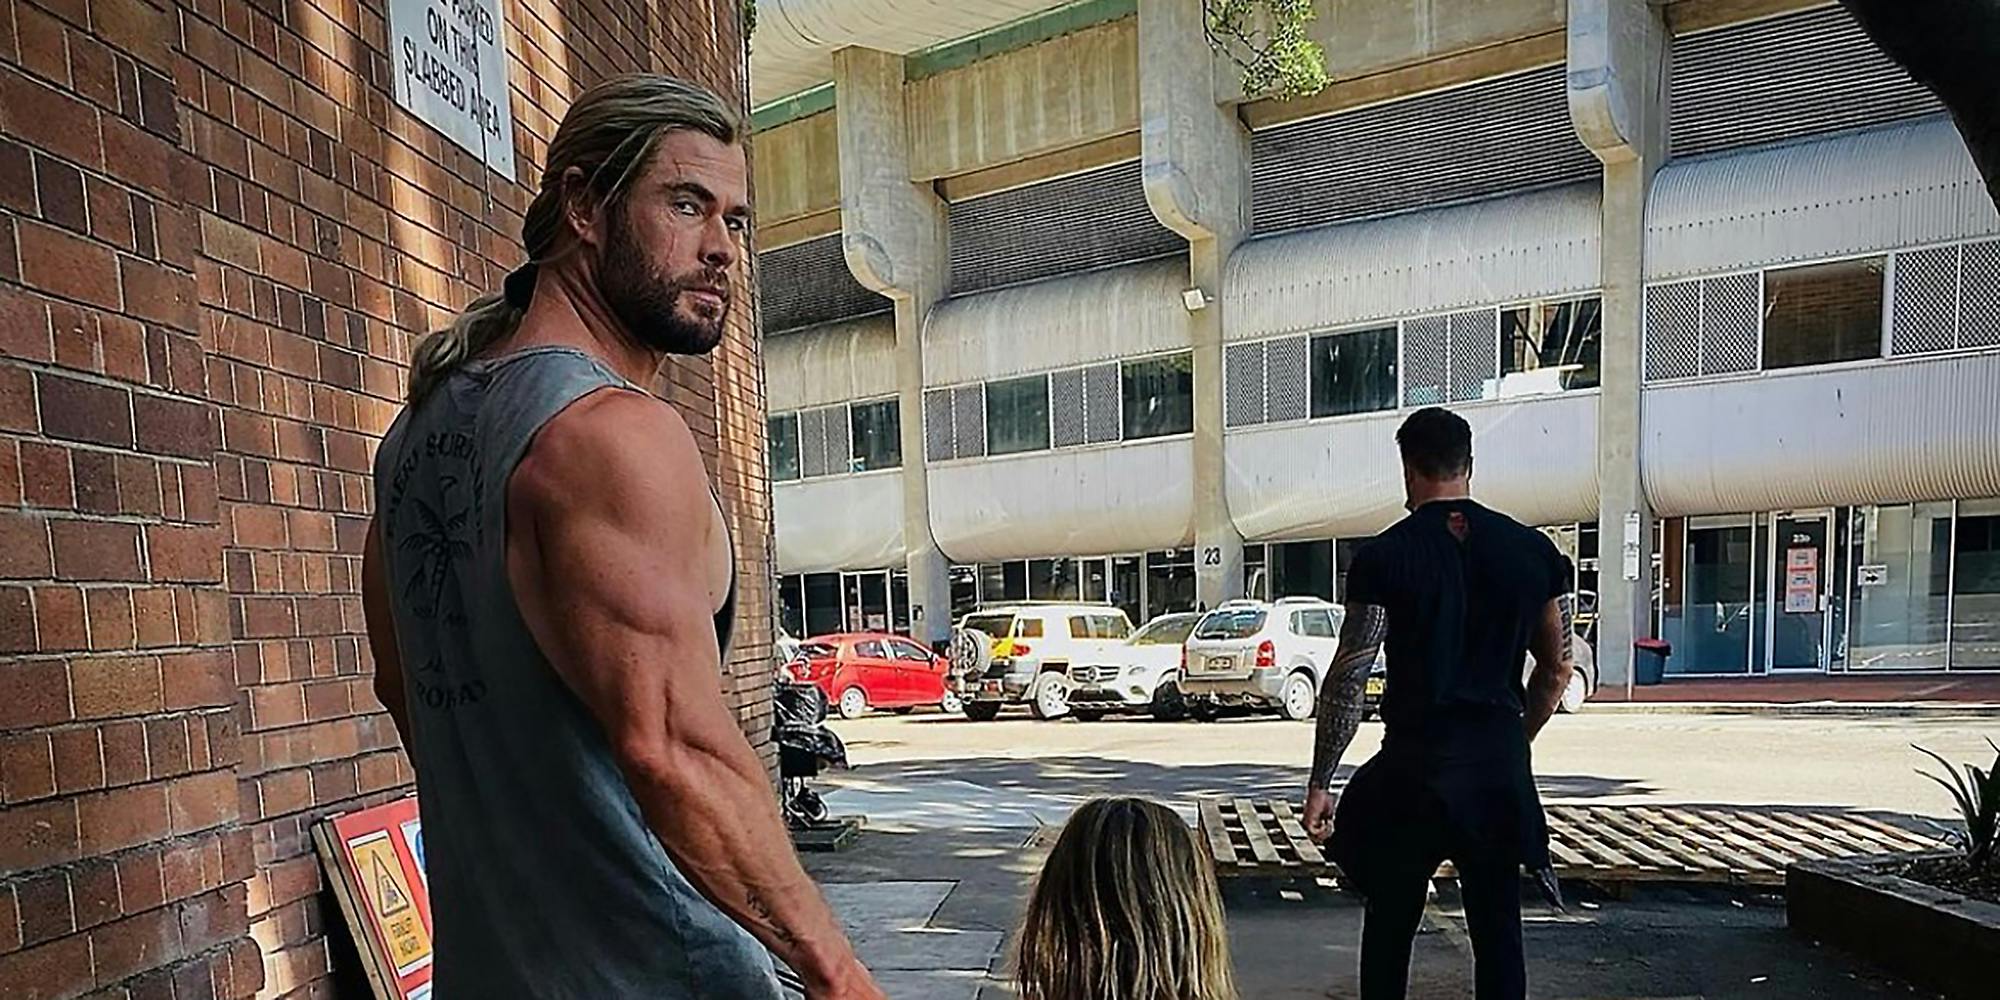 Chris Hemsworth's Jacked Arms Spark Debate About Body Standards